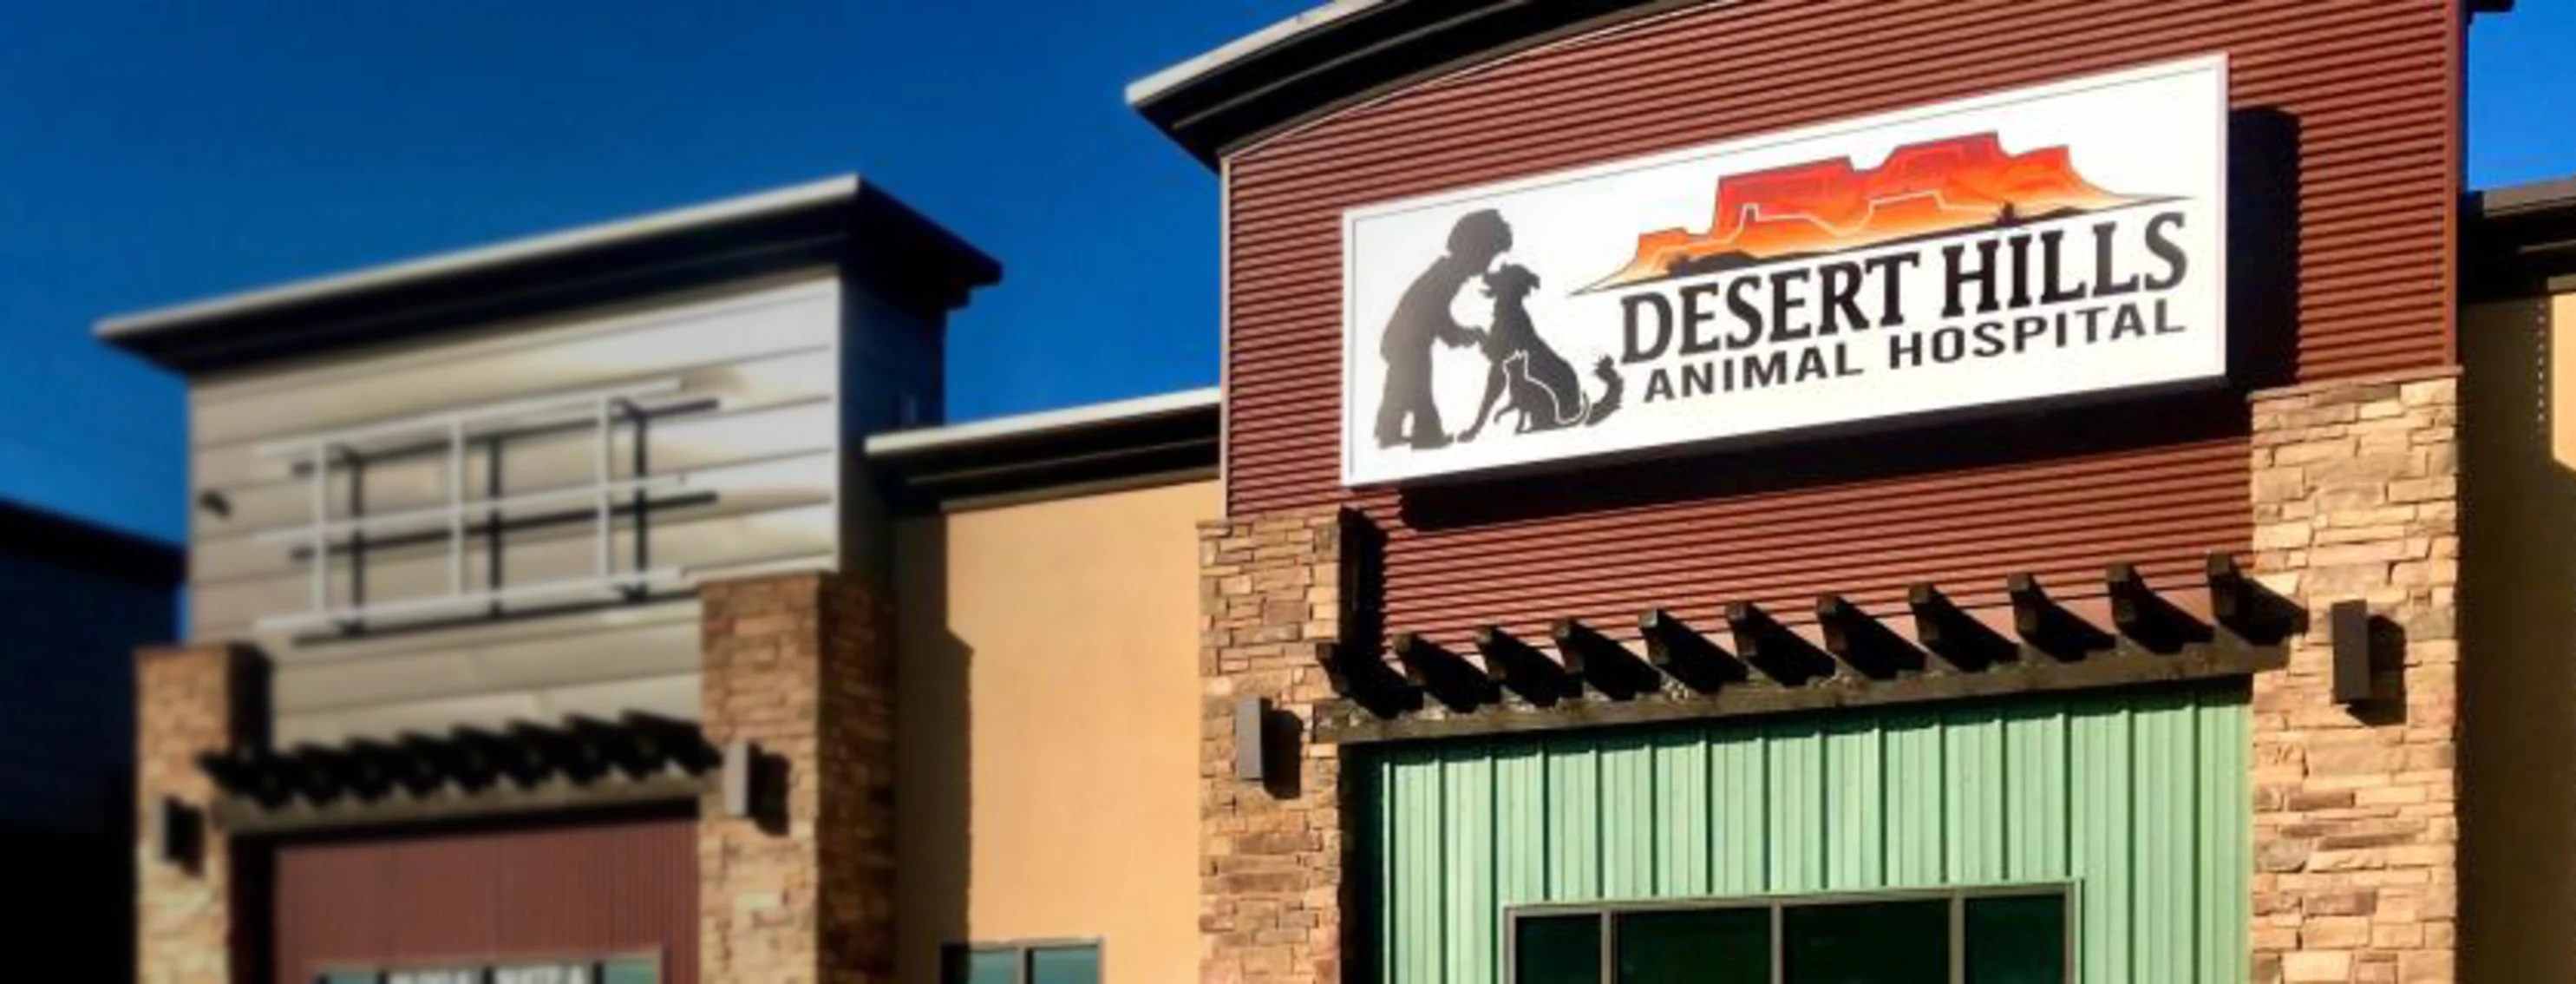 Exterior photo of Desert Hills Animal Hospital and front signage